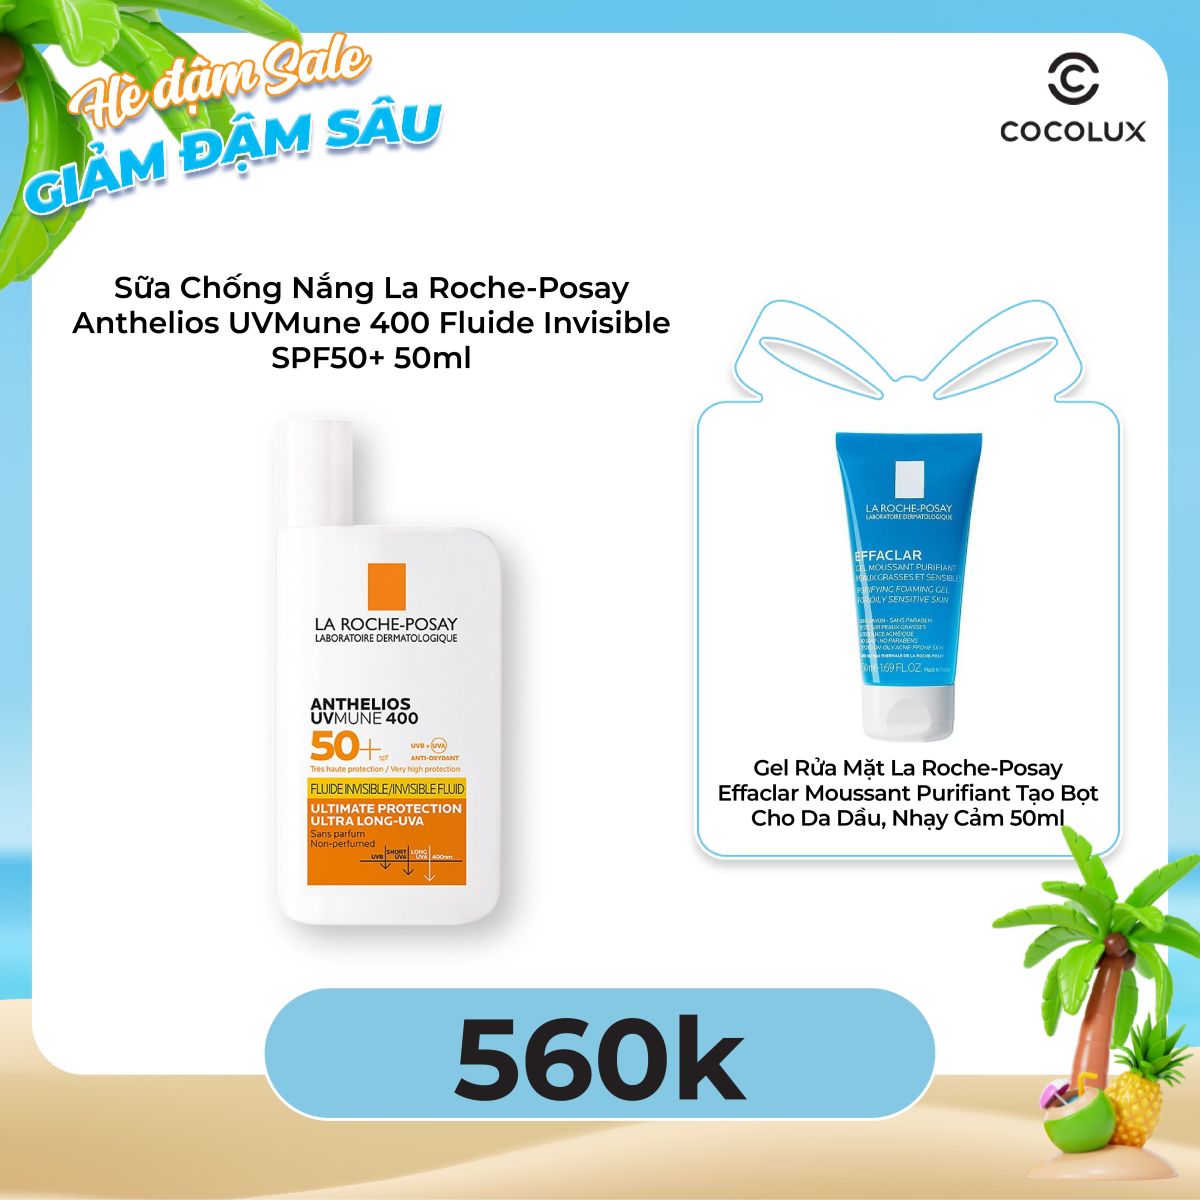 Sữa Chống Nắng La Roche-Posay Anthelios UVMune 400 Fluide Invisible SPF50+ 50ml